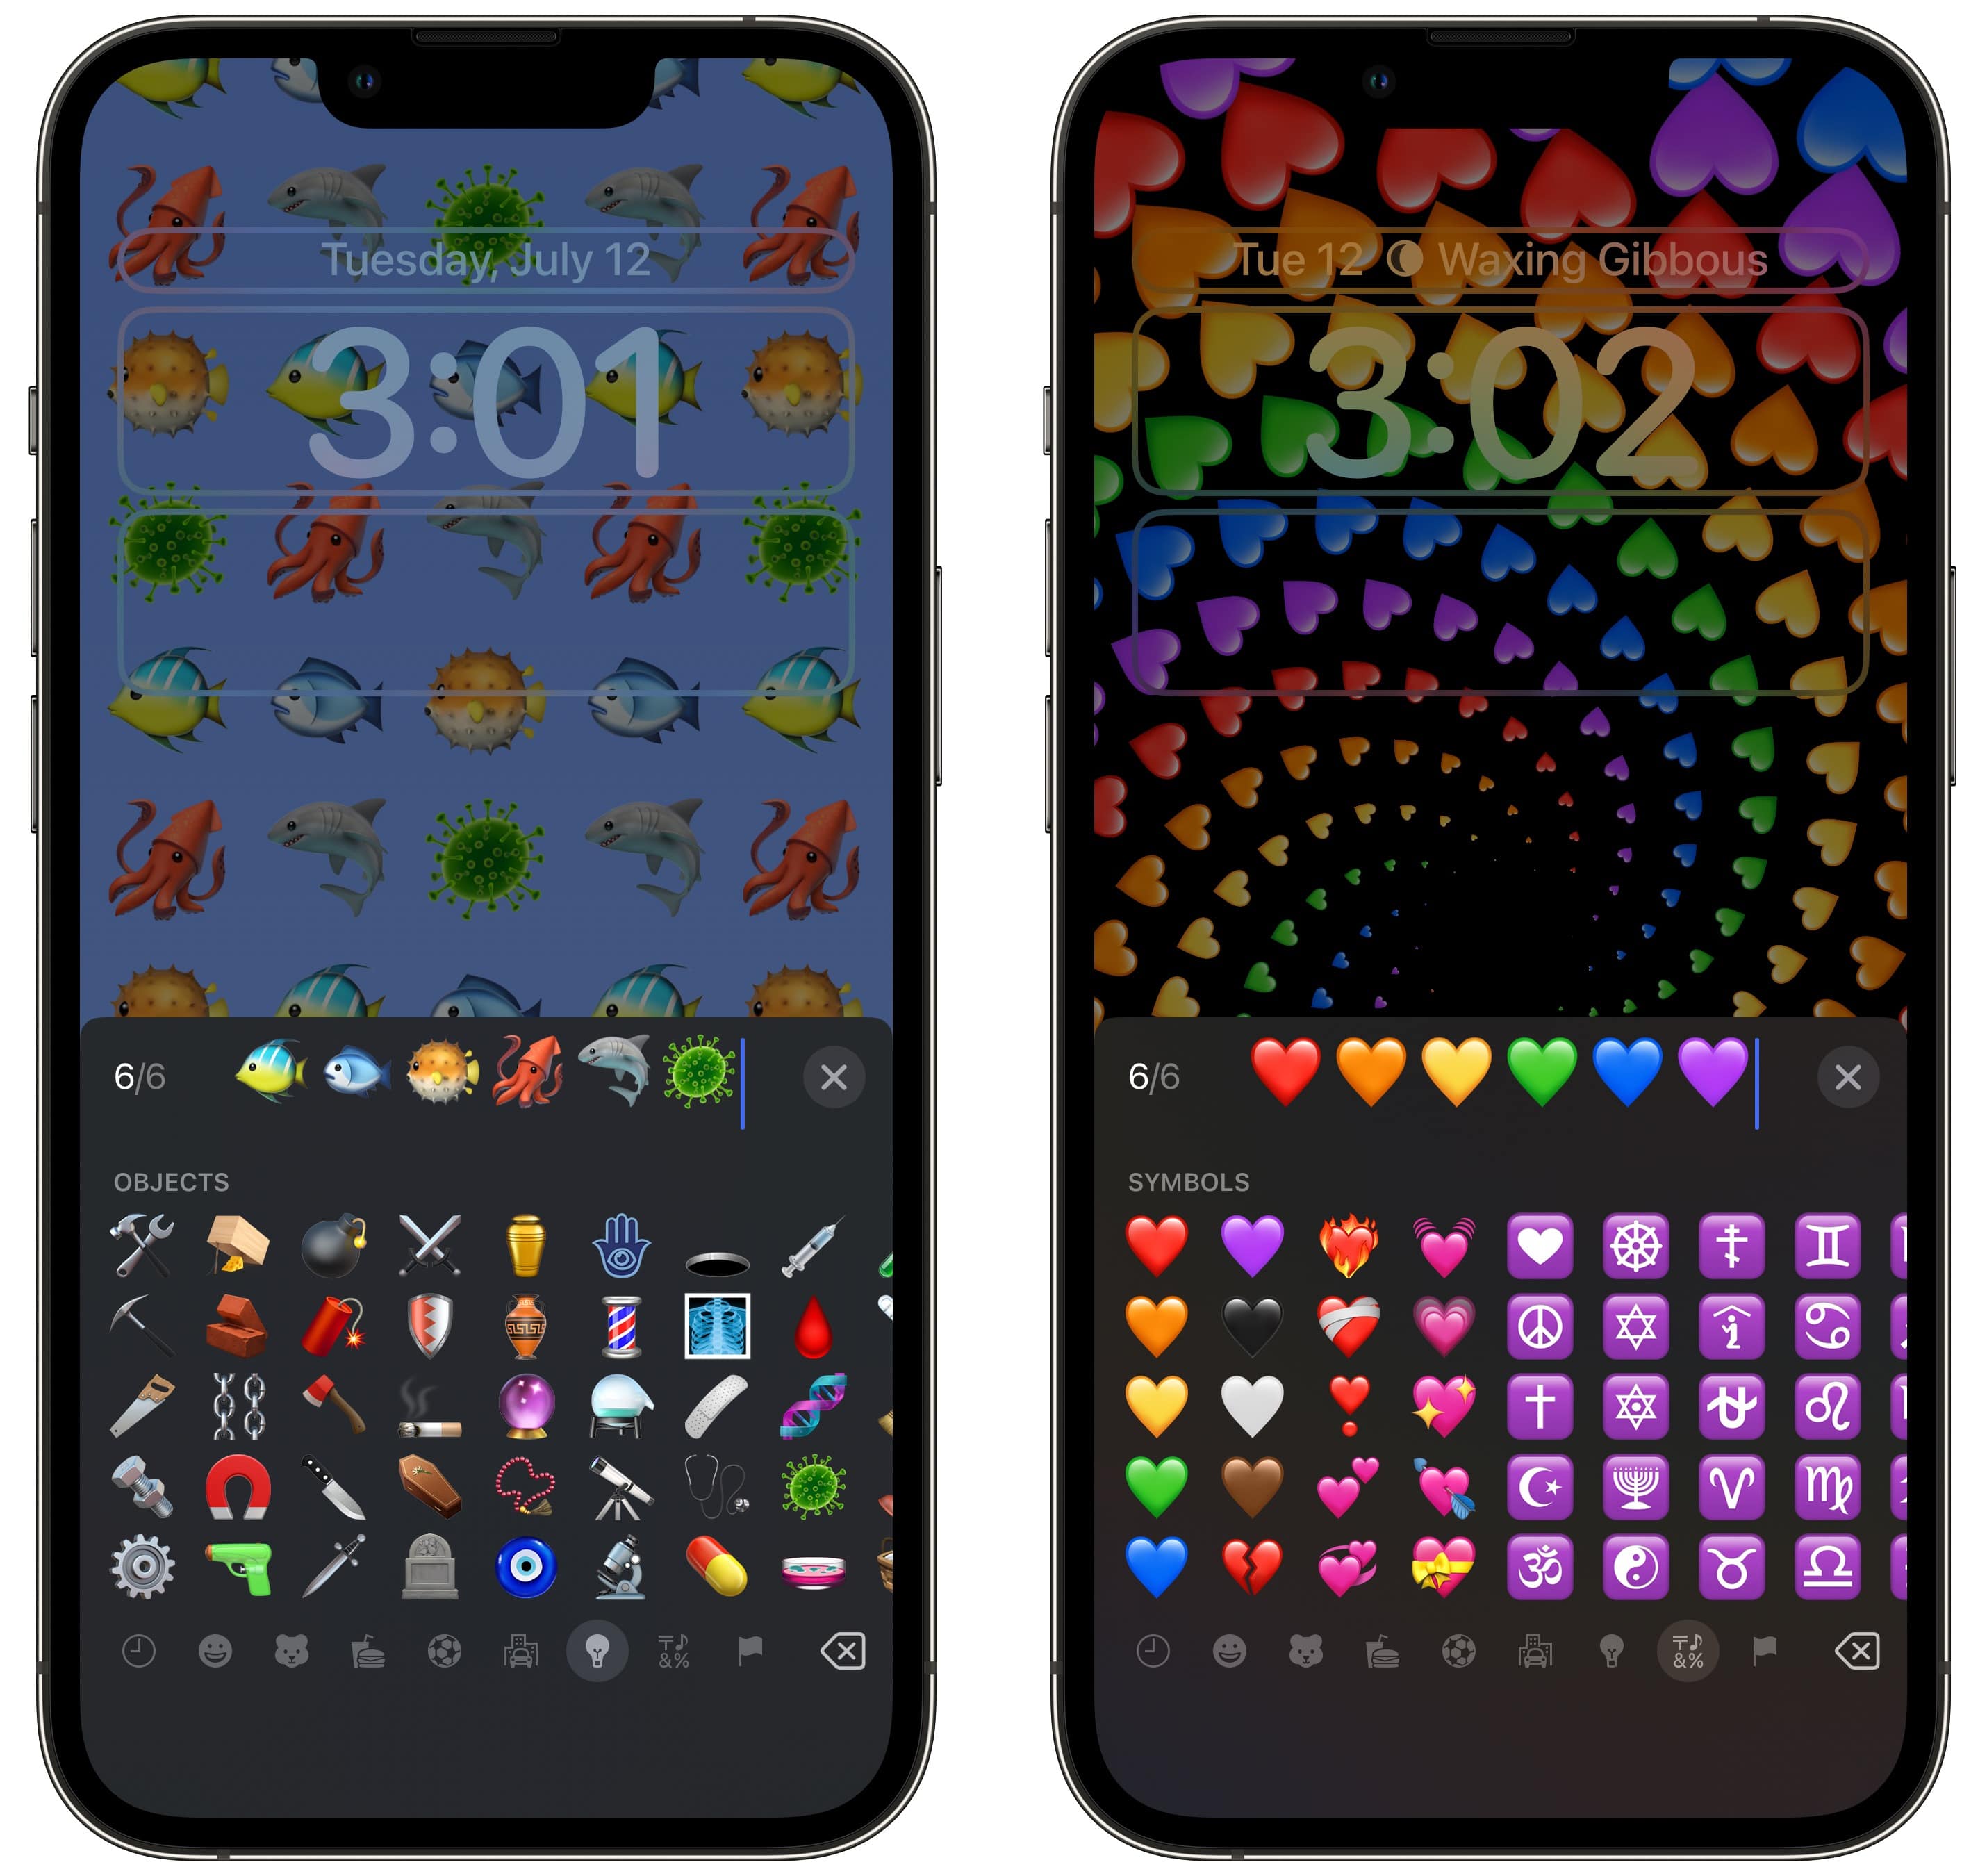 Pick your own emoji to make a nice themed wallpaper with a trippy kaleidoscope background.